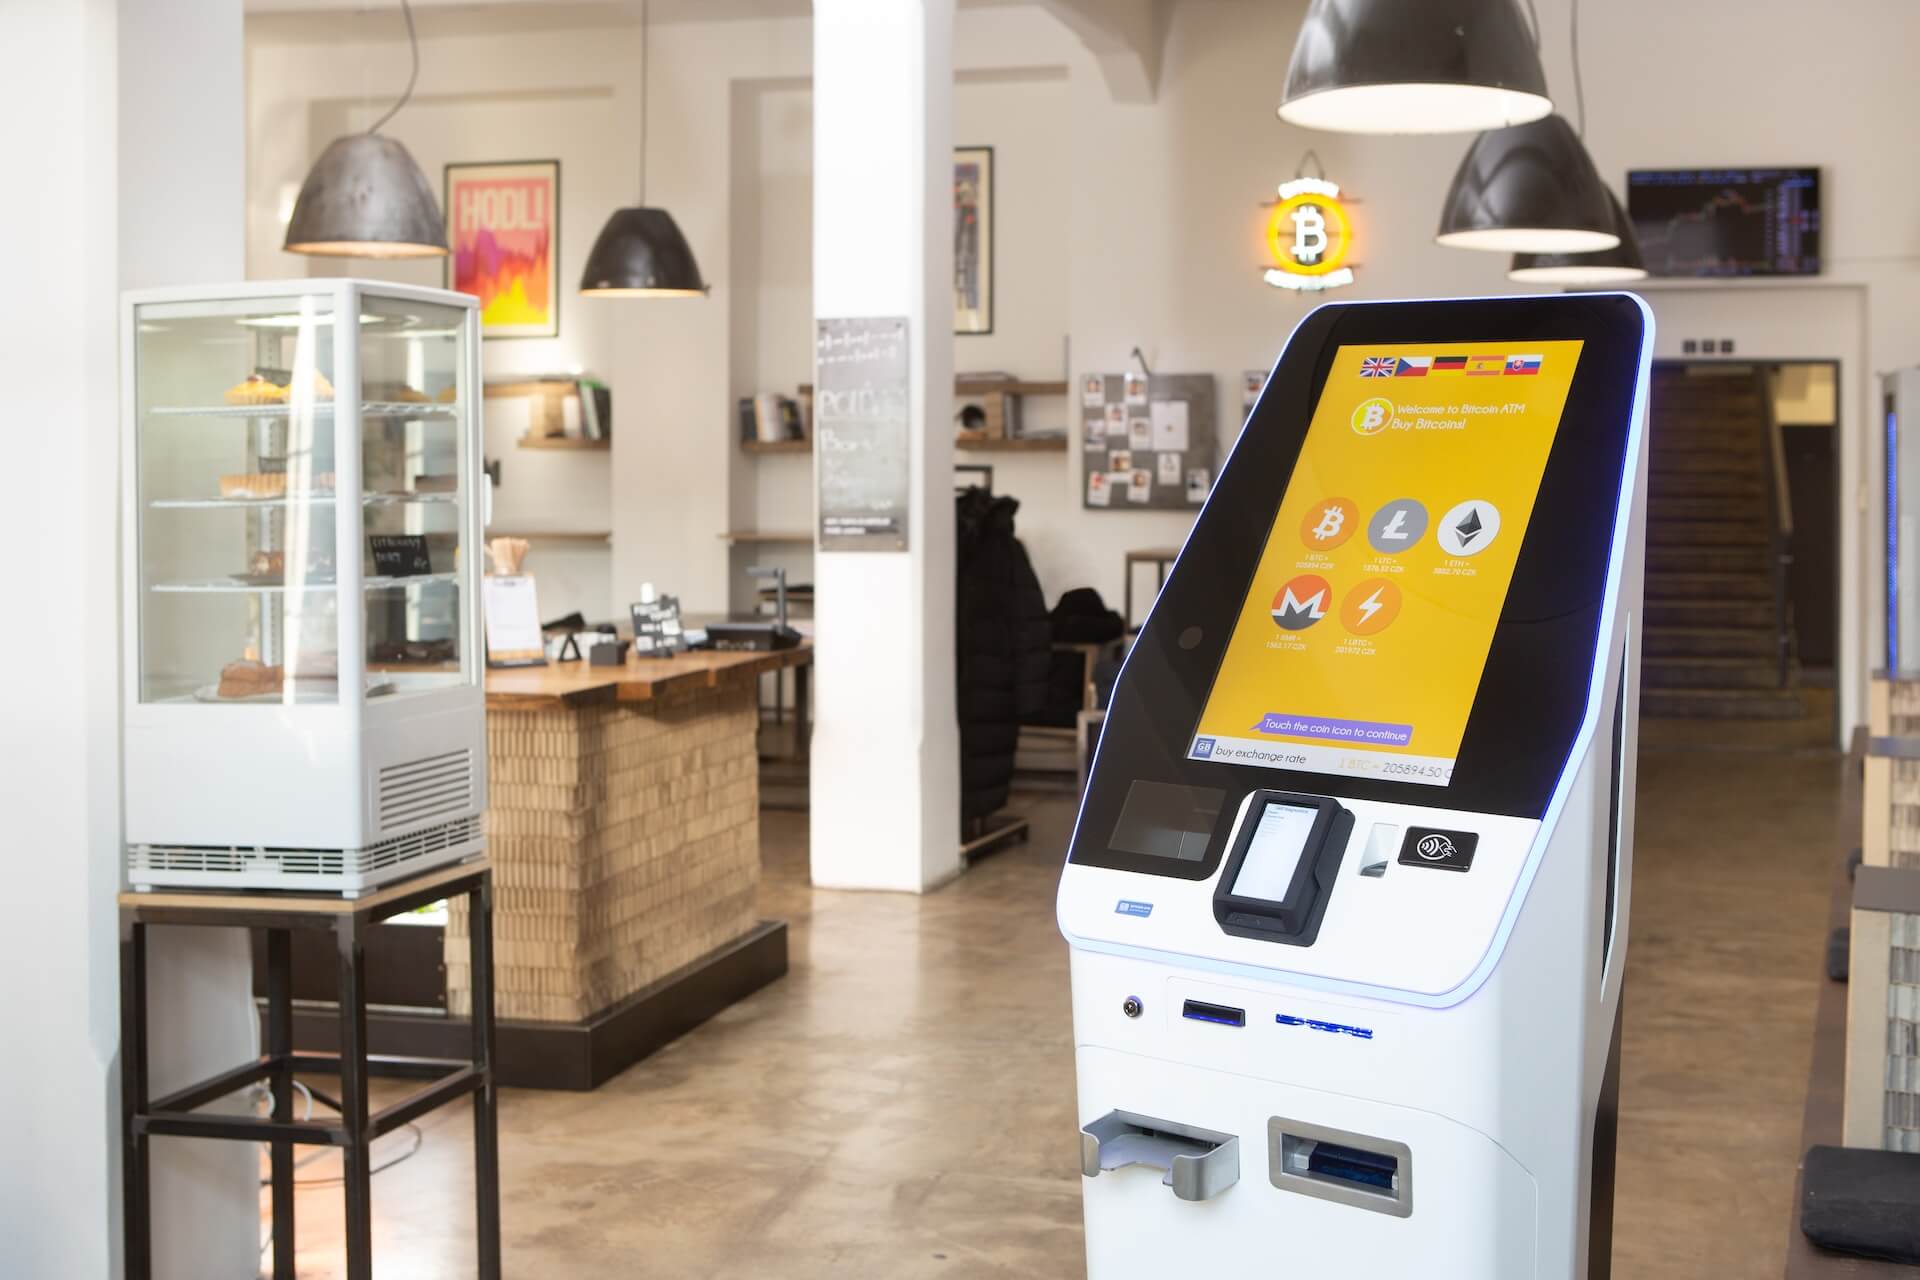 Where can I find these Bitcoin ATMs in Dubai